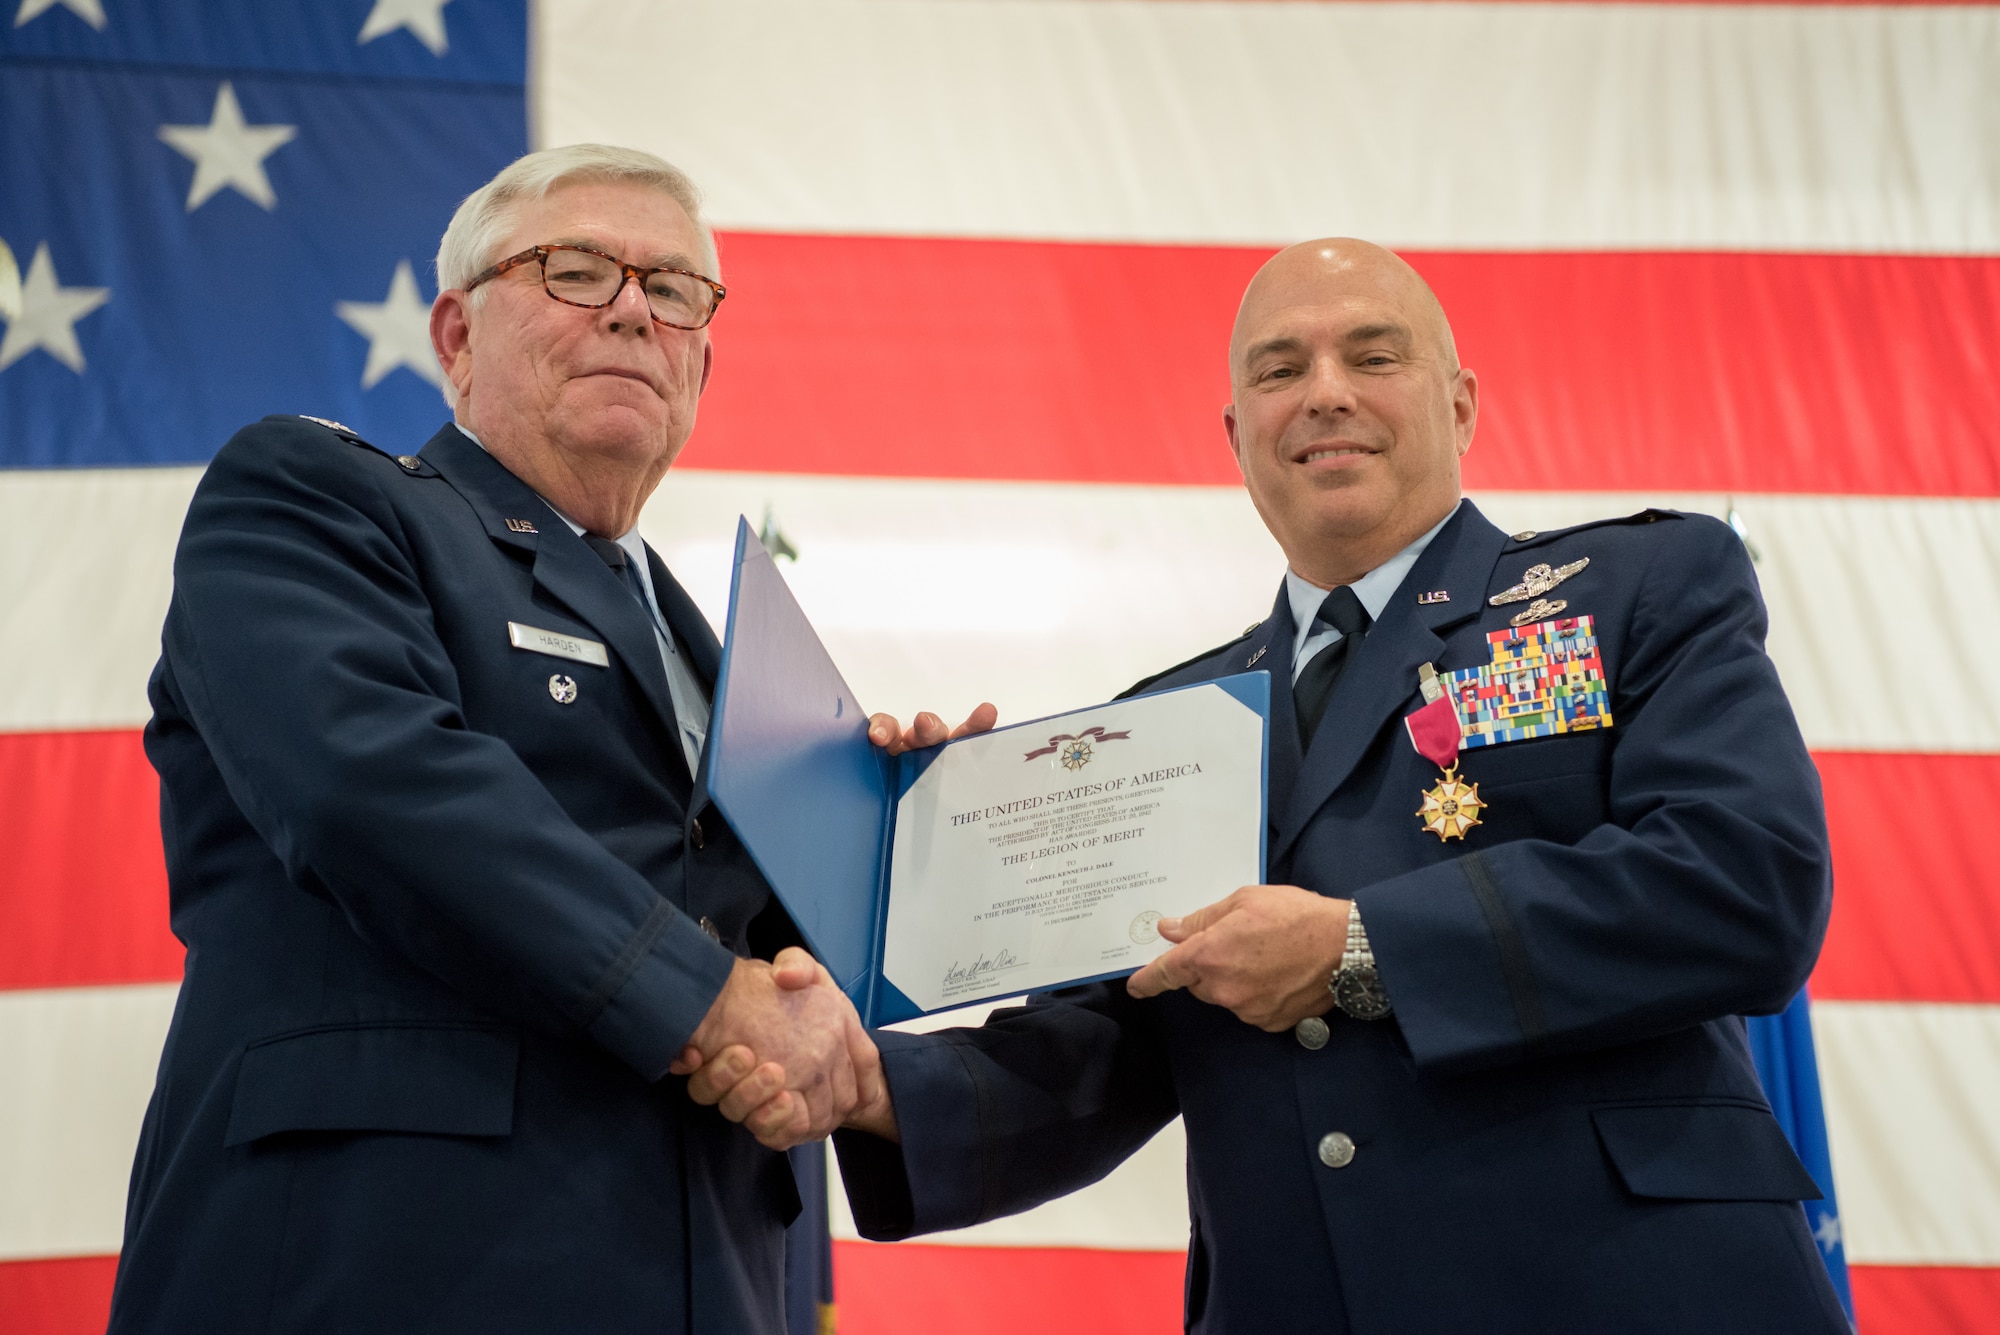 Col. Ken Dale (right), outgoing commander of the 123rd Maintenance Group, receives the Legion of Merit from retired Col. Michael Harden, former commander of the 123rd Airlift Wing, during Dale’s retirement ceremony at the Kentucky Air National Guard Base in Louisville, Ky., on Dec. 1, 2018. Dale is retiring after more than 38 years of service to the Kentucky Air National Guard. (U.S. Air National Guard photo by Staff Sgt. Joshua Horton)